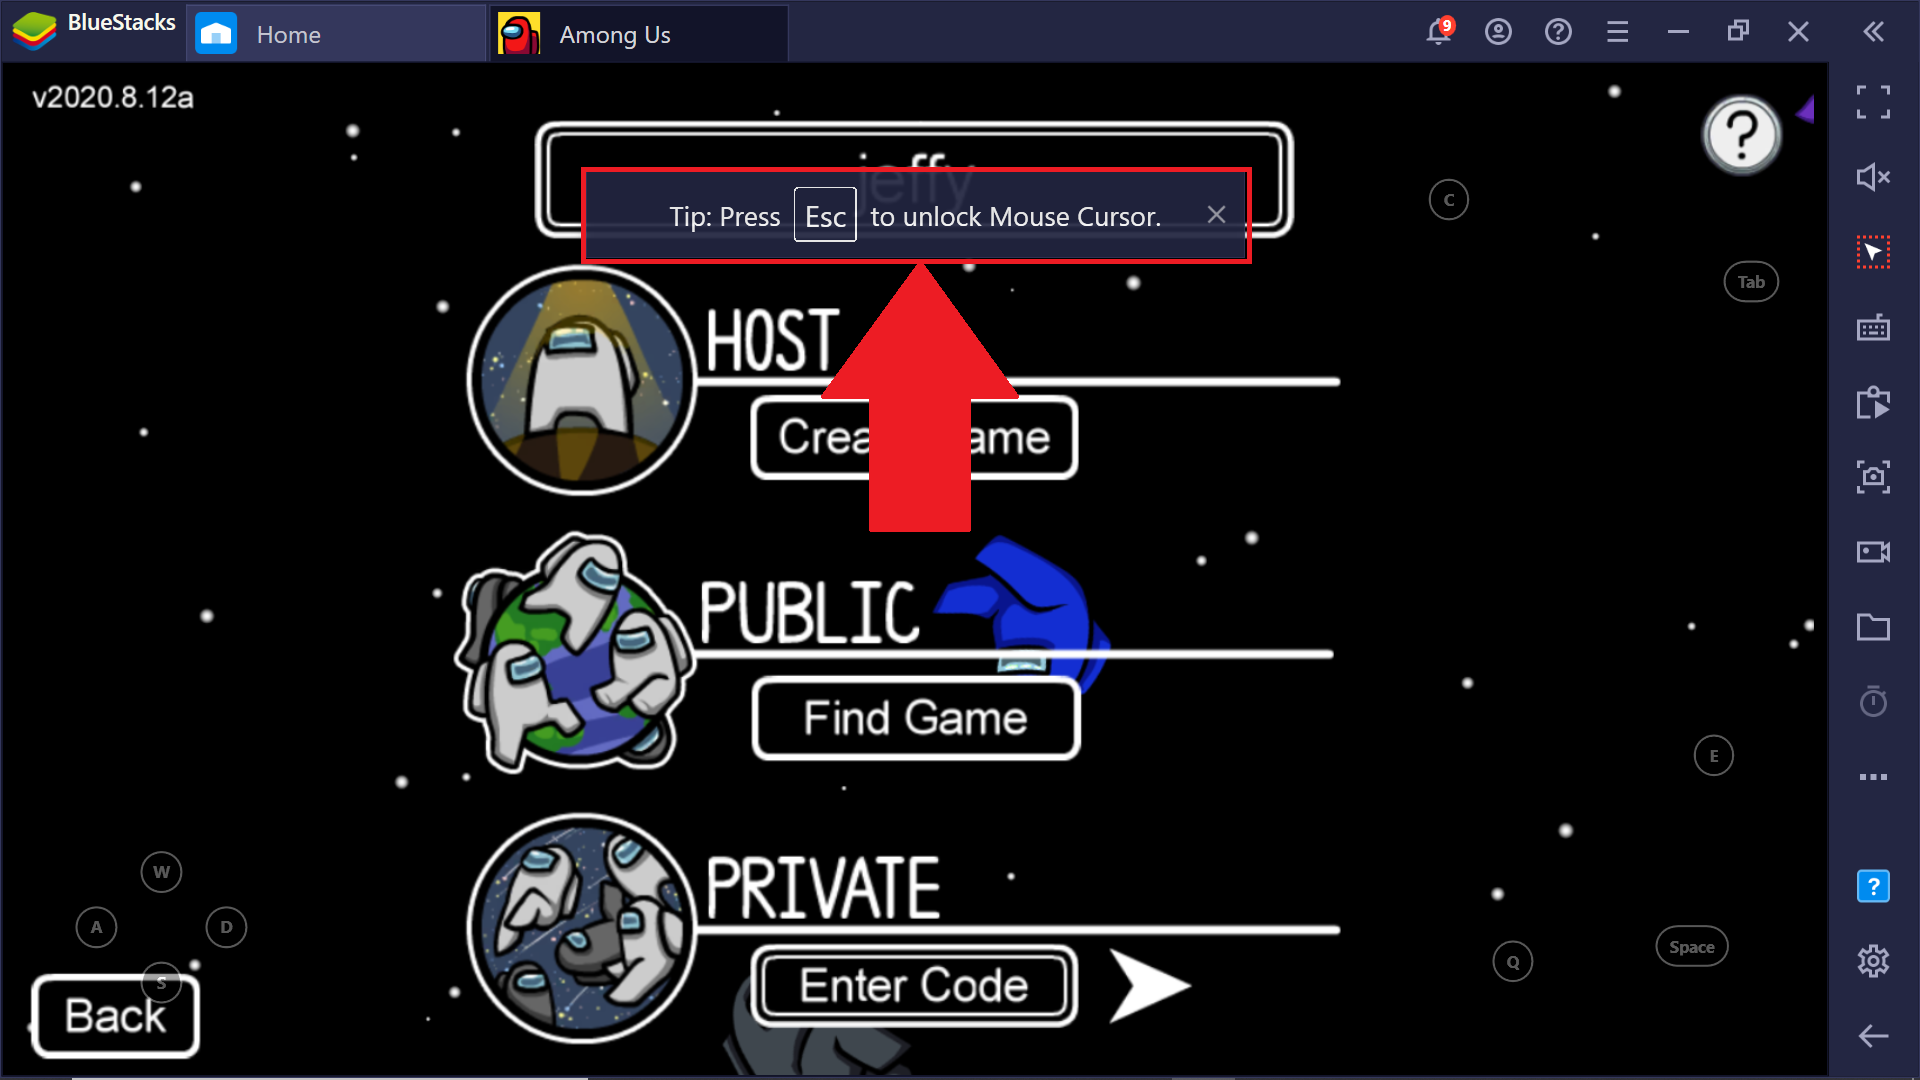 How To Lock Your Cursor Within A Game On Bluestacks 4 Bluestacks Support - roblox custom shift lock